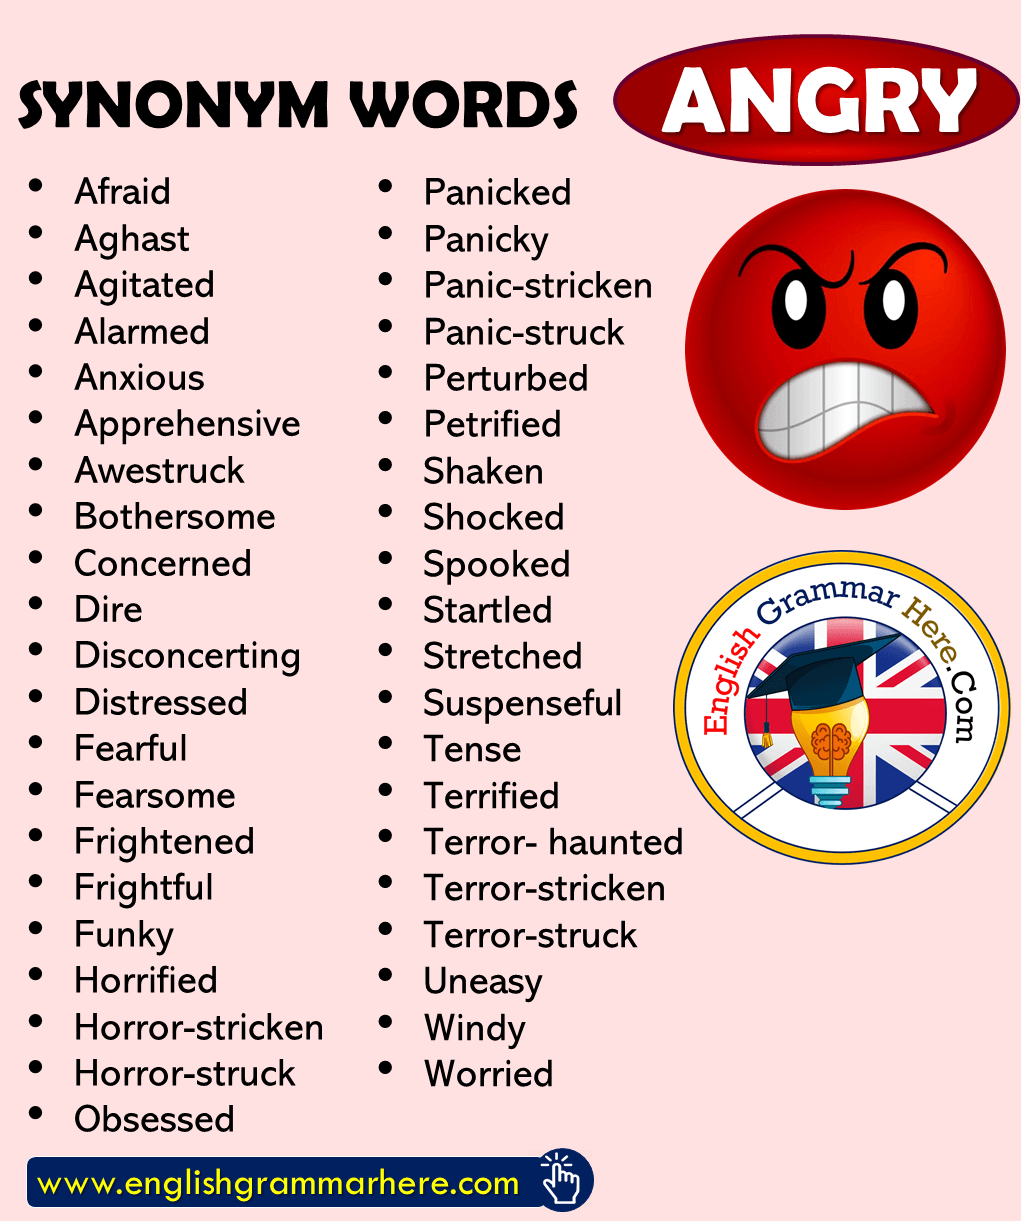 Synonym Words – ANGRY, English Vocabulary